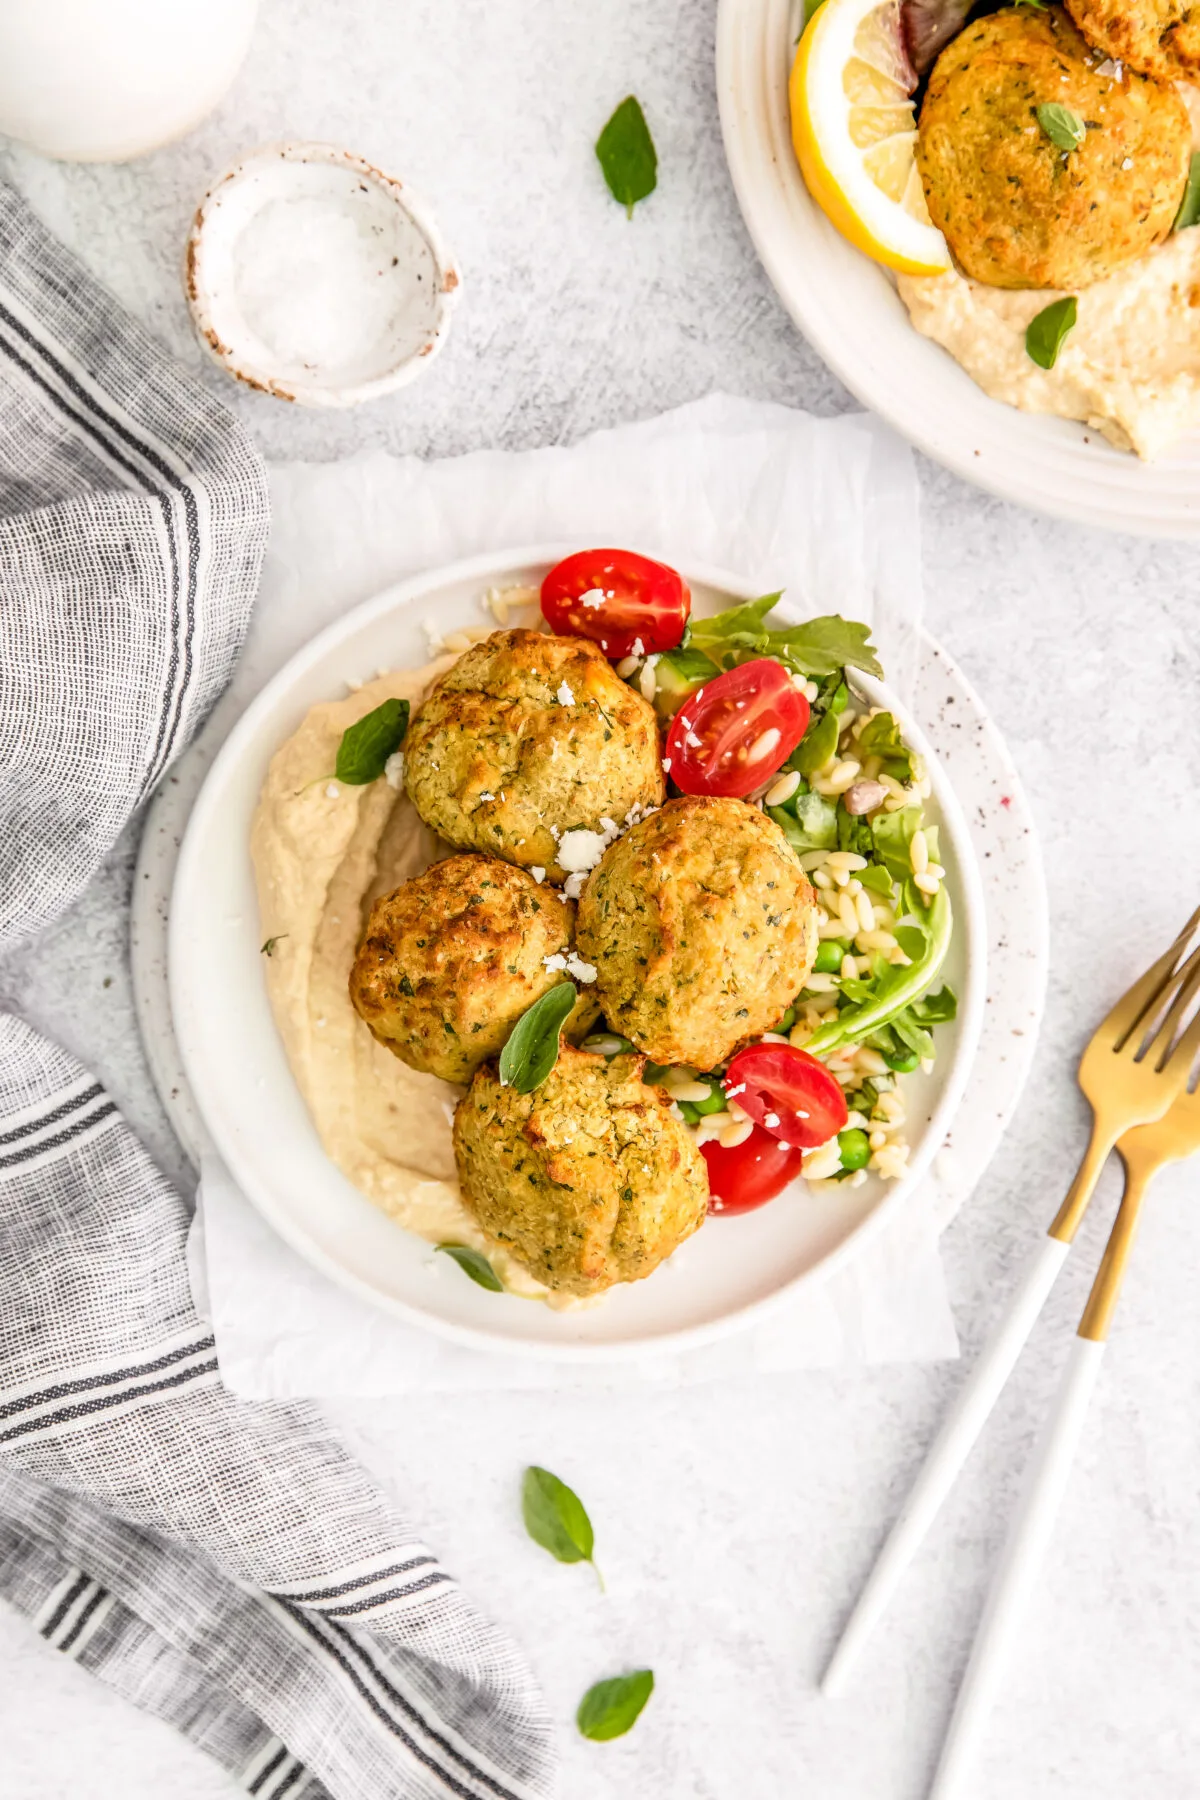 This air fryer falafel recipe is an easy and healthy way to make falafel that are crispy on the outside and deliciously soft on the inside.